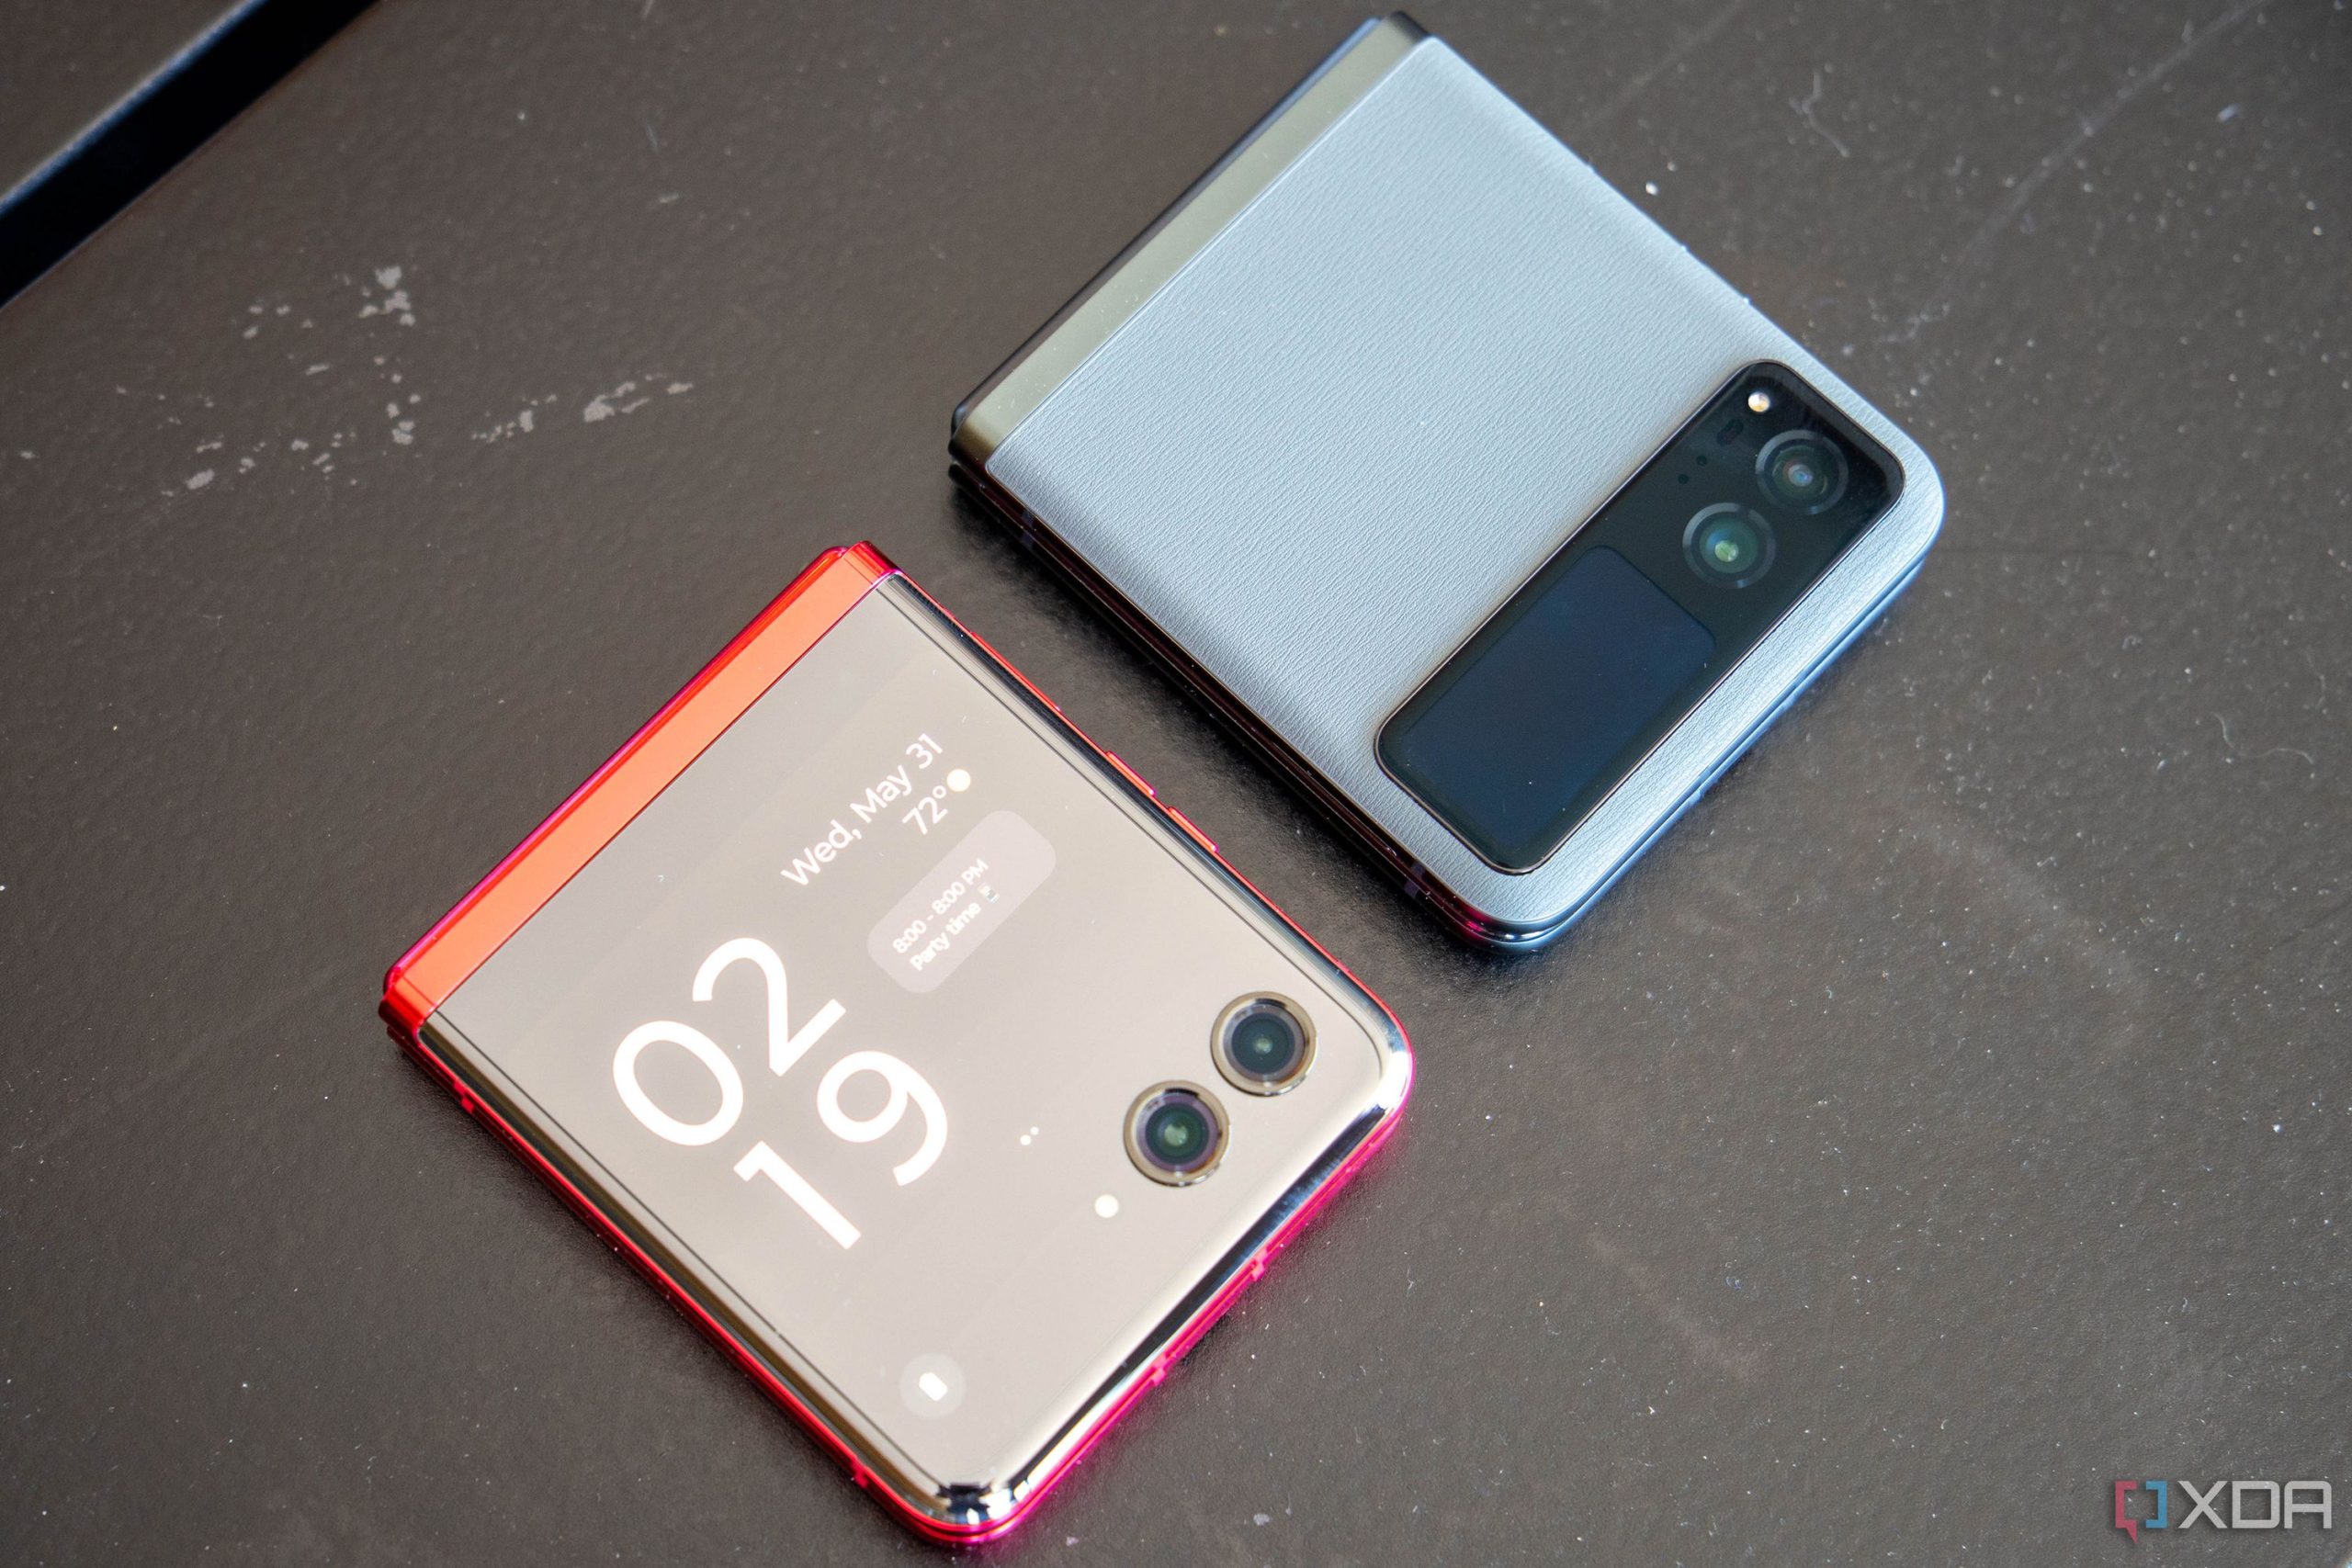 Motorola's new Razr and Razr+ give Samsung its first major Z Flip competition